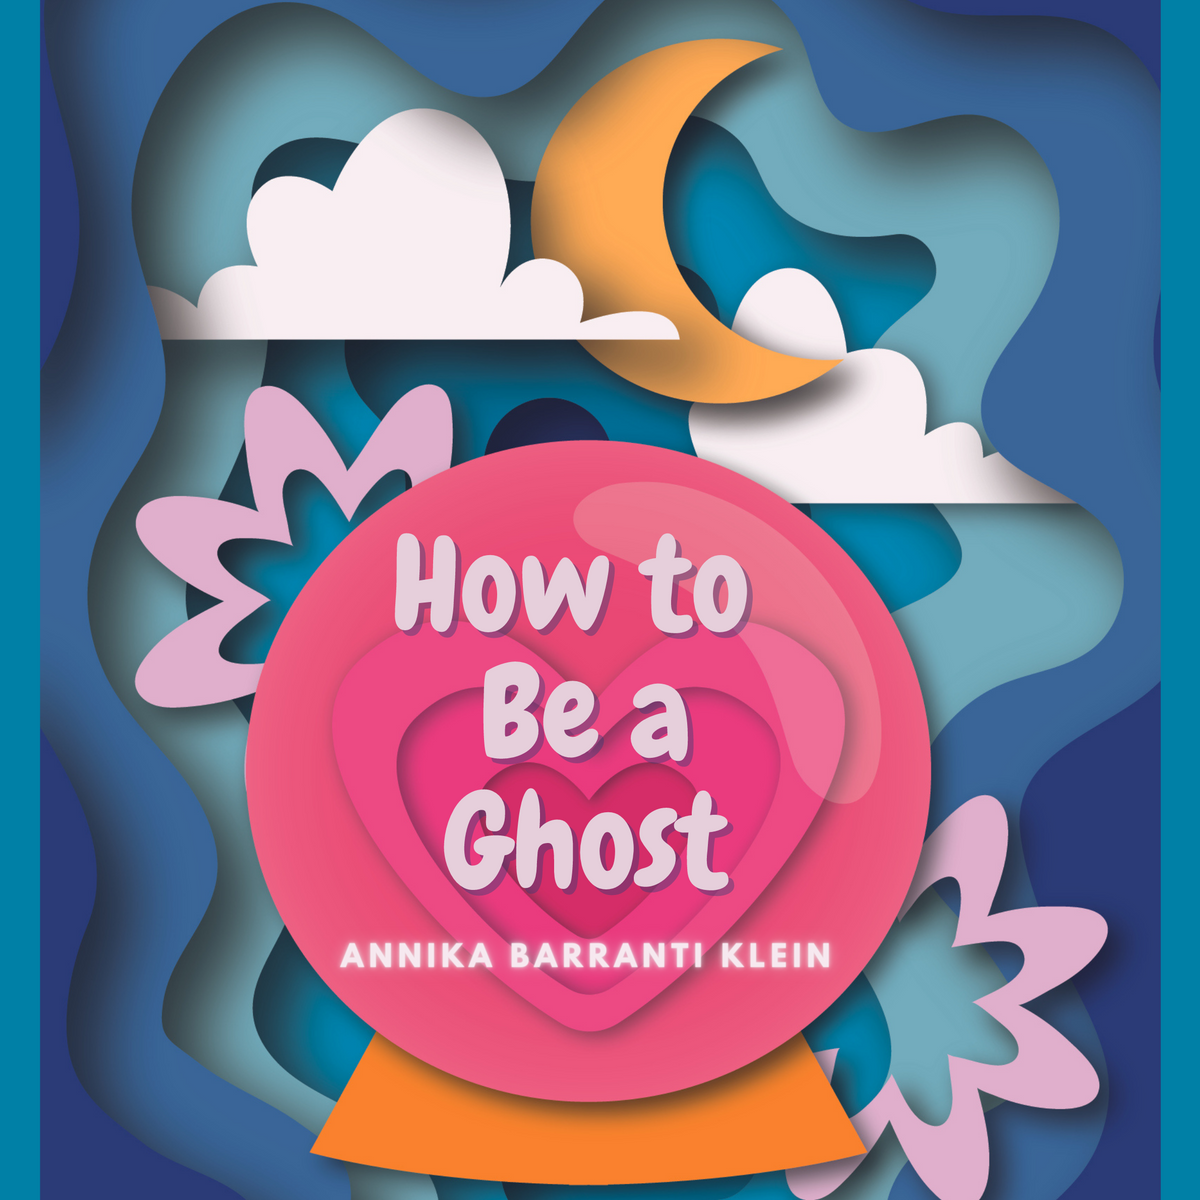 Día de Muertos Special: How to Be a Ghost by Annika Barranti Klein and Tithe by Héctor González